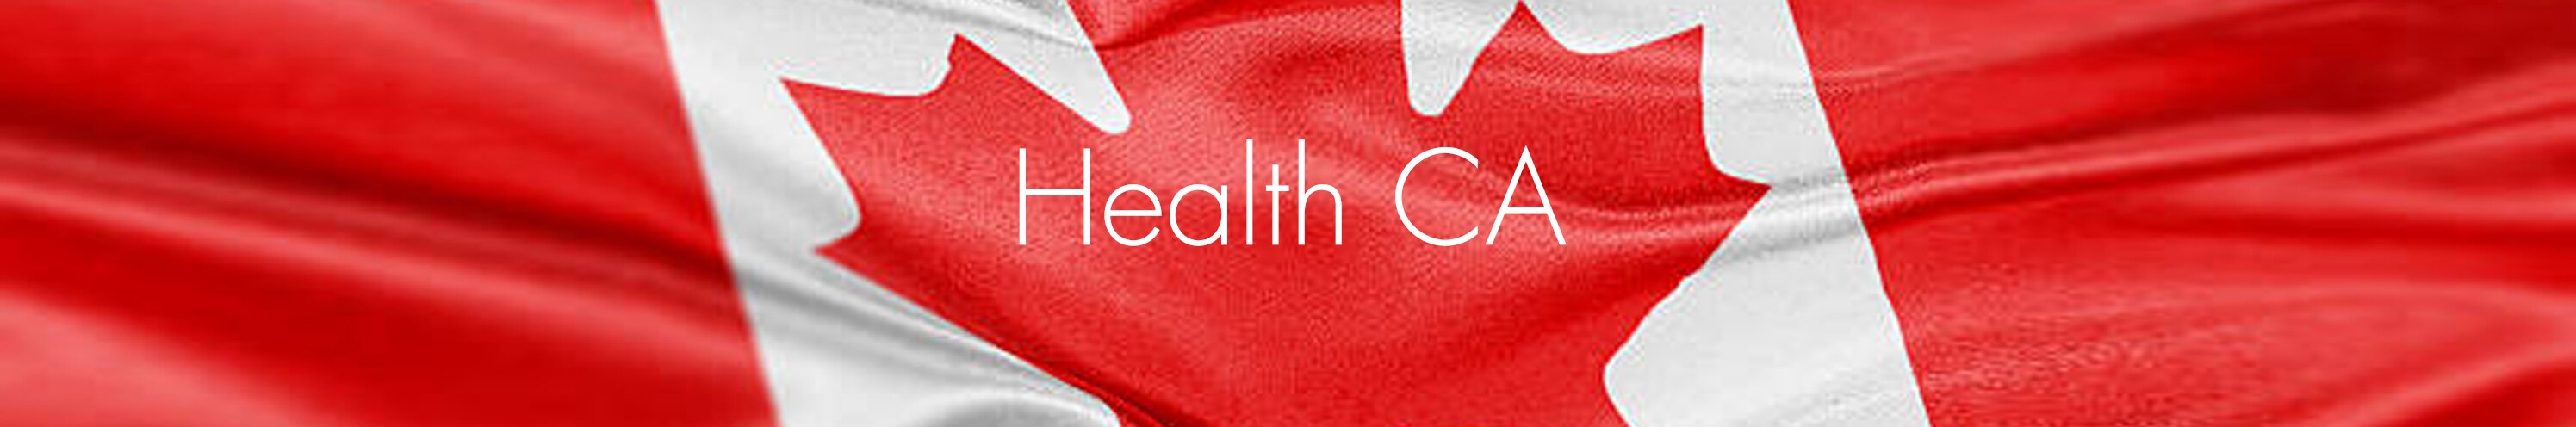 Health Canada Corded Window Covering Treatment Changes